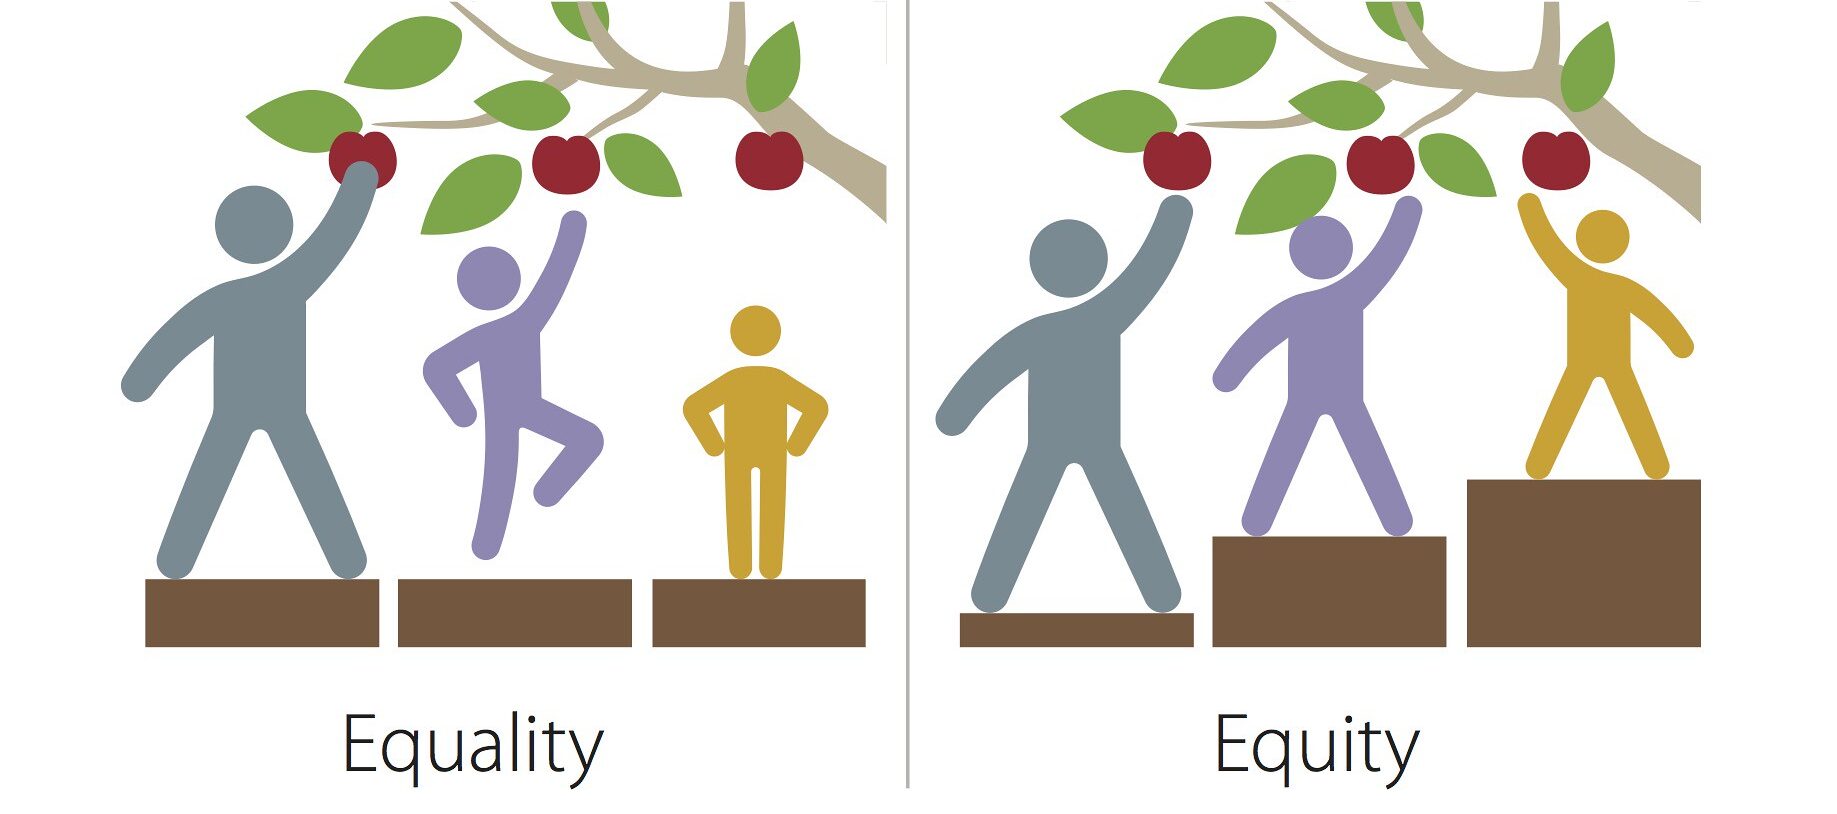 Equality versus Equity